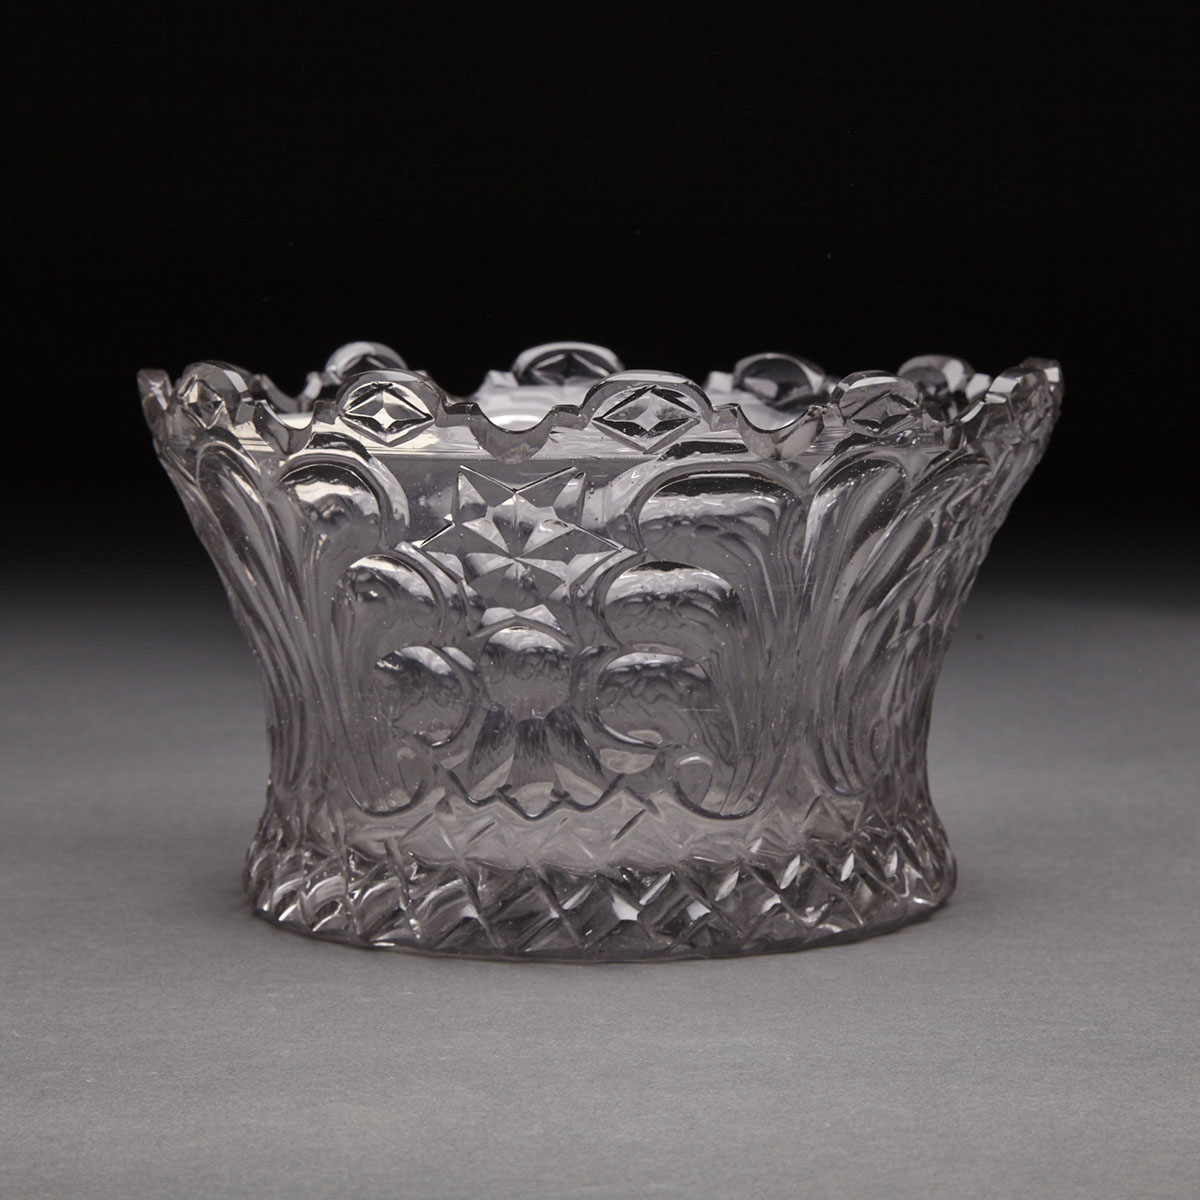 Continental Cut Glass Bowl, late 18th century